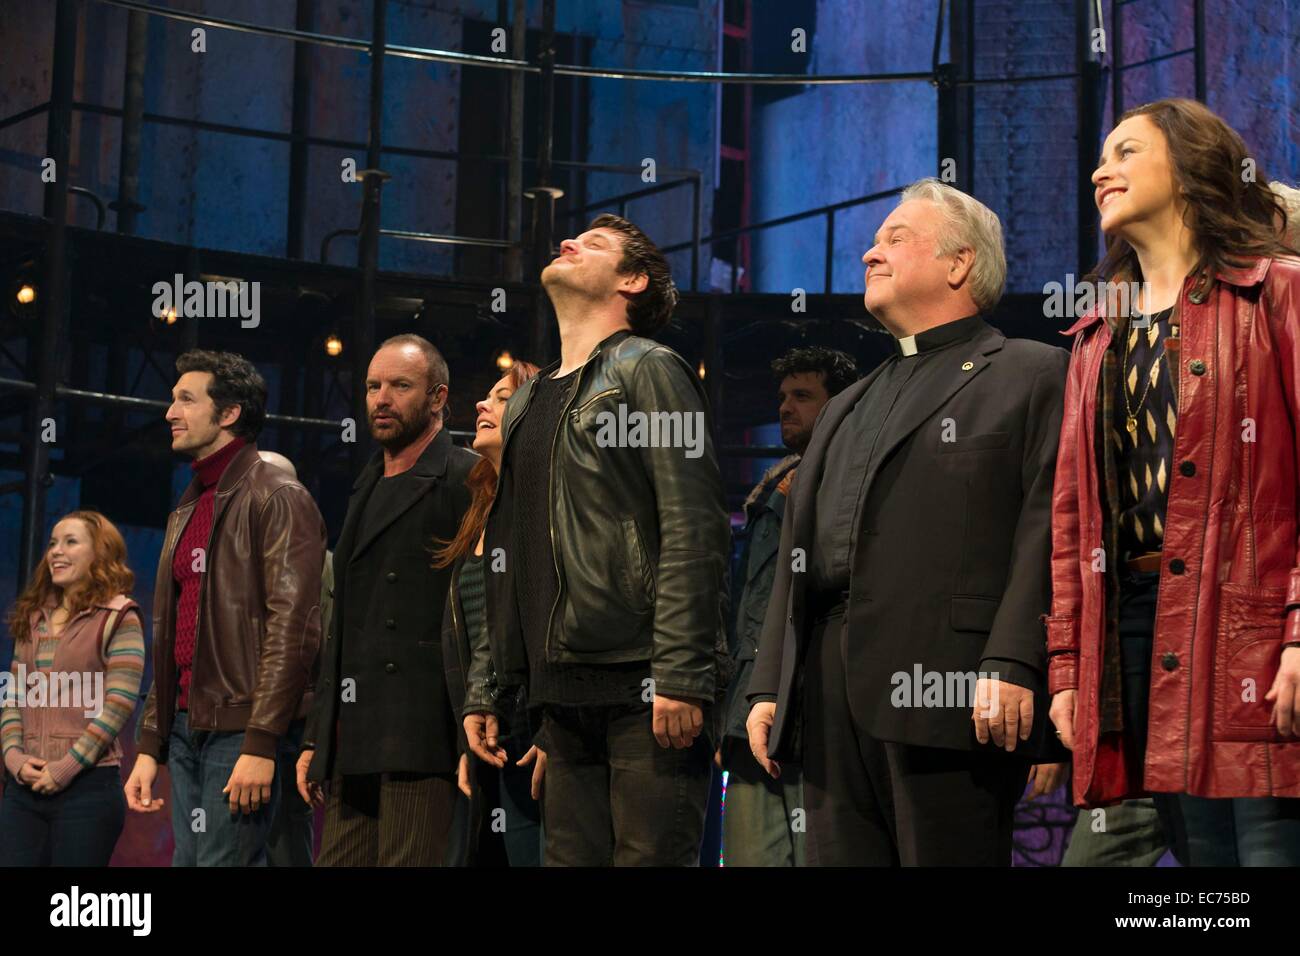 New York, NY, USA. 9th Dec, 2014. Sting (3rd from left) at a public appearance for Sting Joins Cast of THE LAST SHIP on Broadway, Neil Simon Theatre, New York, NY December 9, 2014. Credit:  Lev Radin/Everett Collection/Alamy Live News Stock Photo